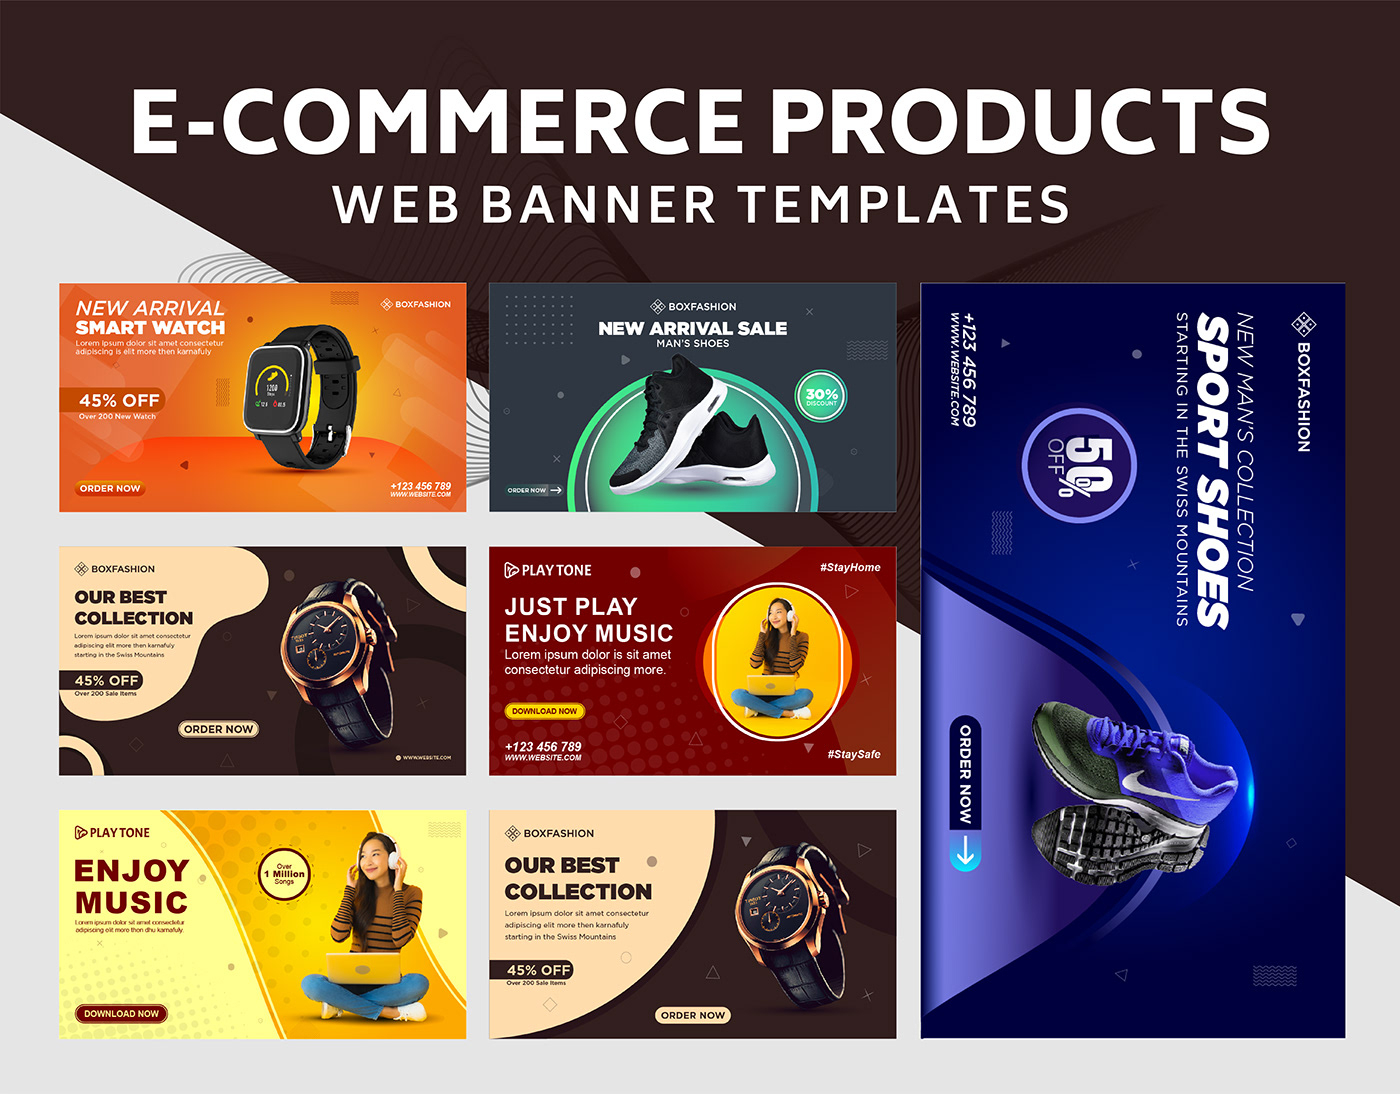 E-Commerce Products Web Banner Template Free Download on Behance